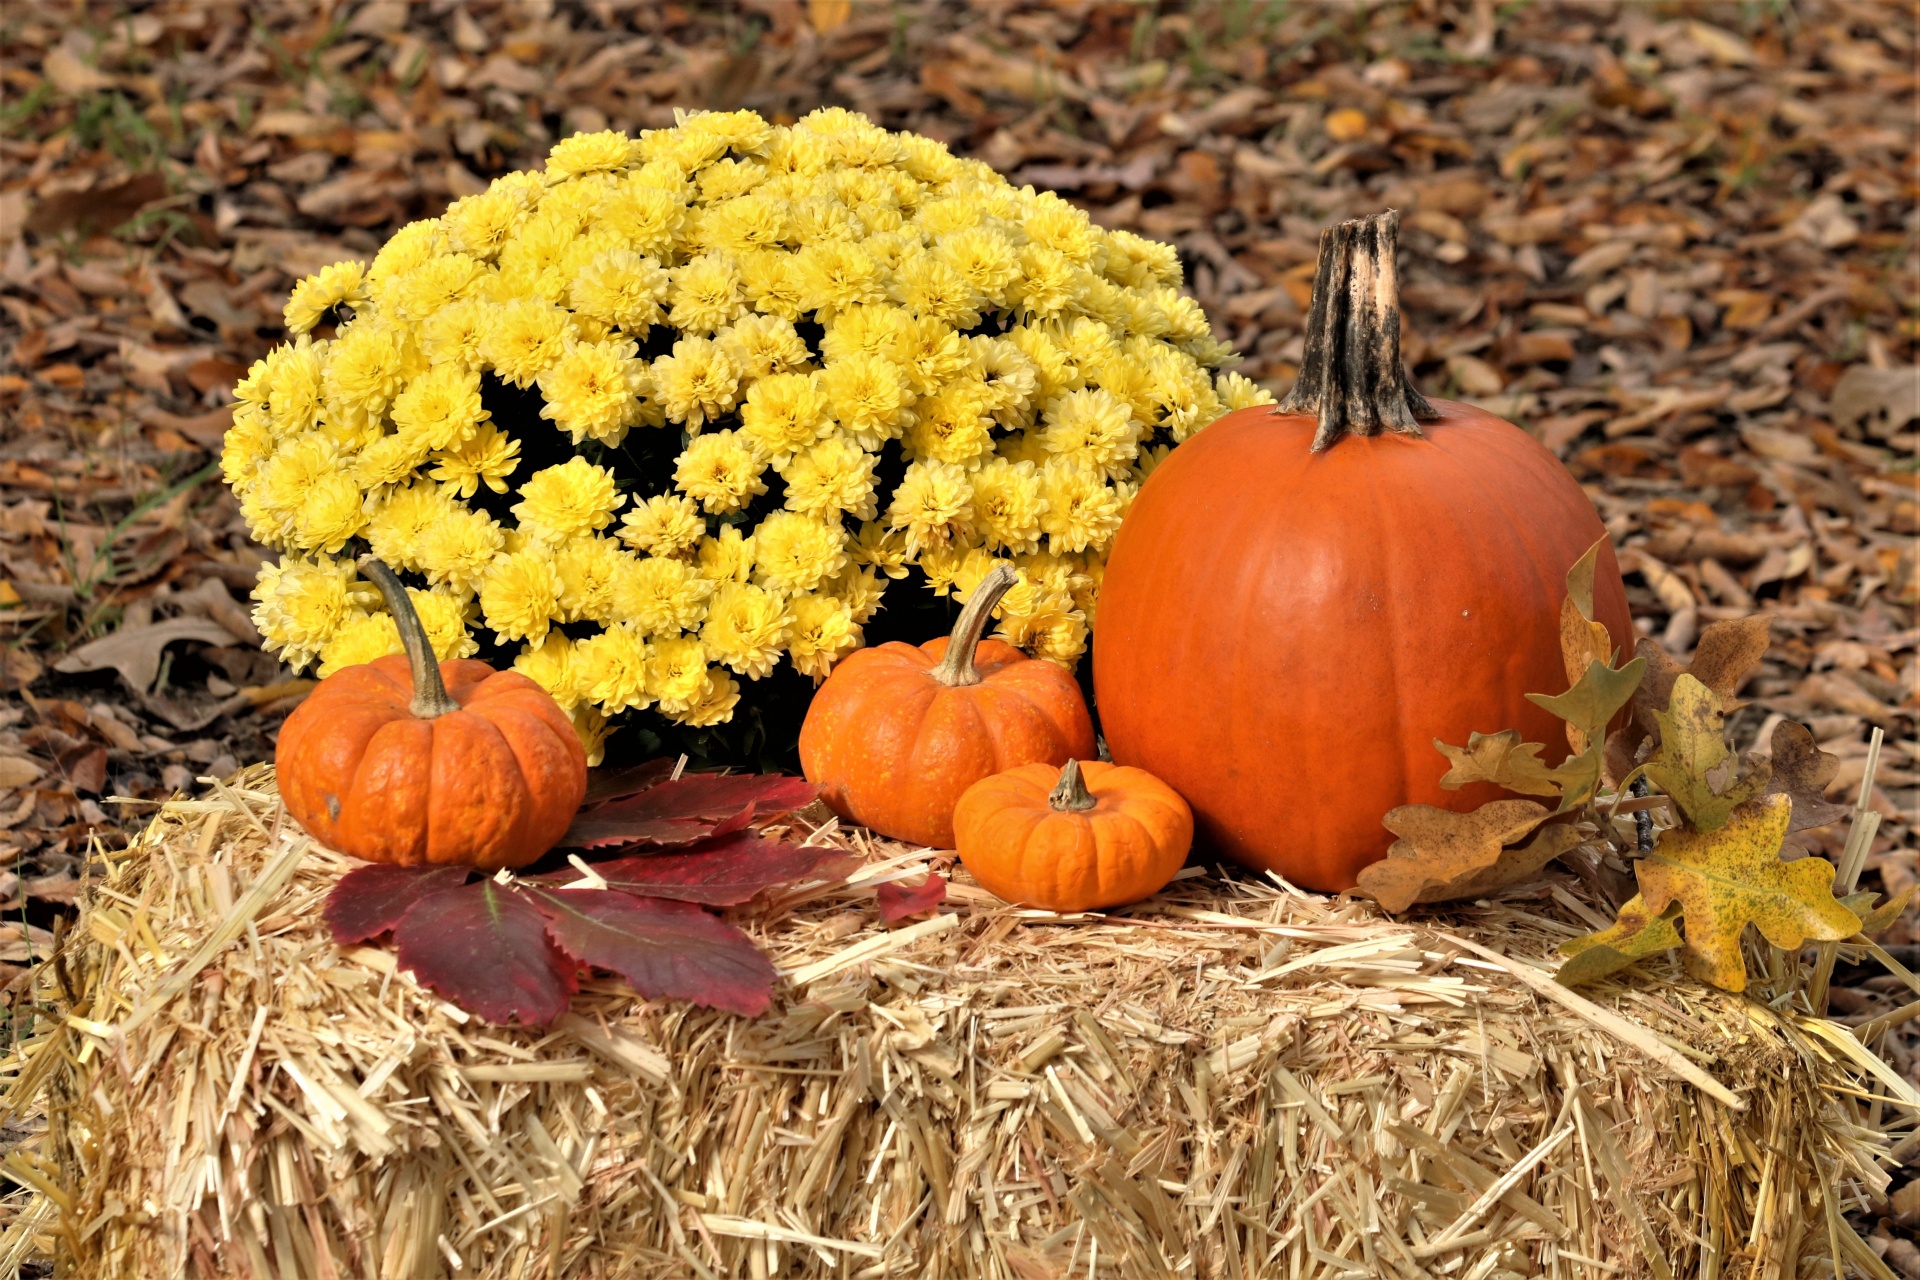 Four orange pumpkins, yellow chrysanthemums and autumn leaves arranged on a bale of hay with autumn leaves in the background, as an outdoor fall decoration.